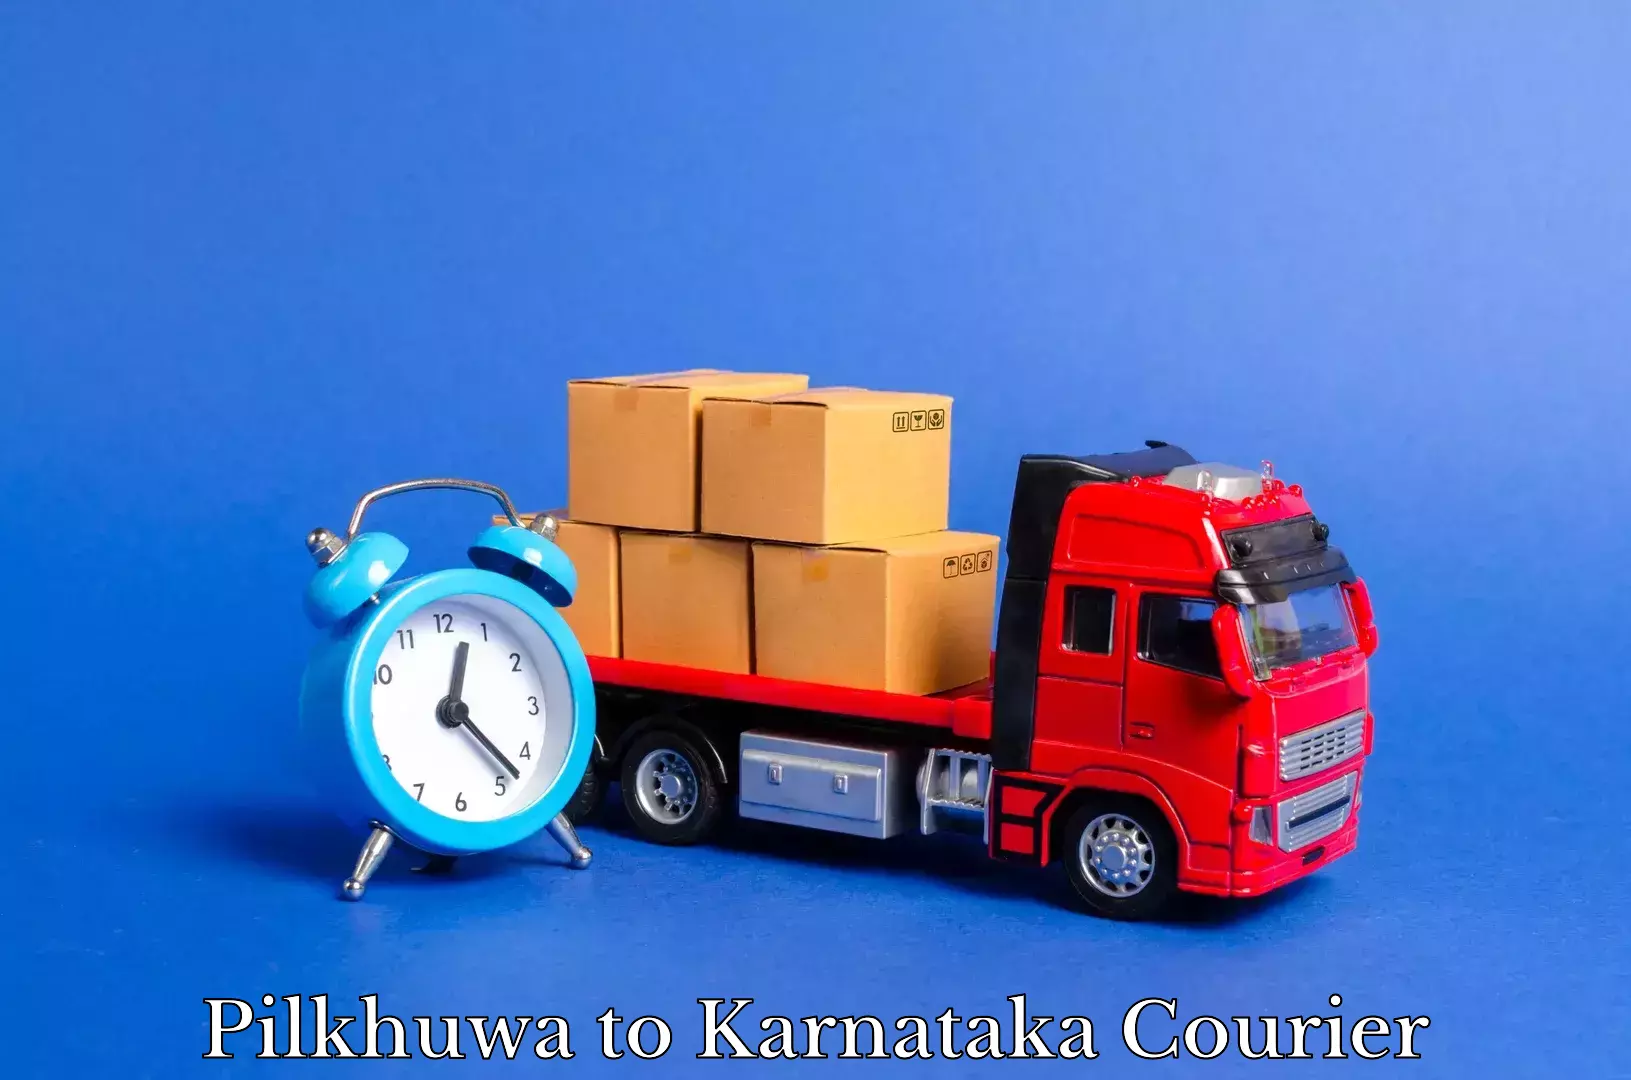 Quality relocation services Pilkhuwa to Huliyar